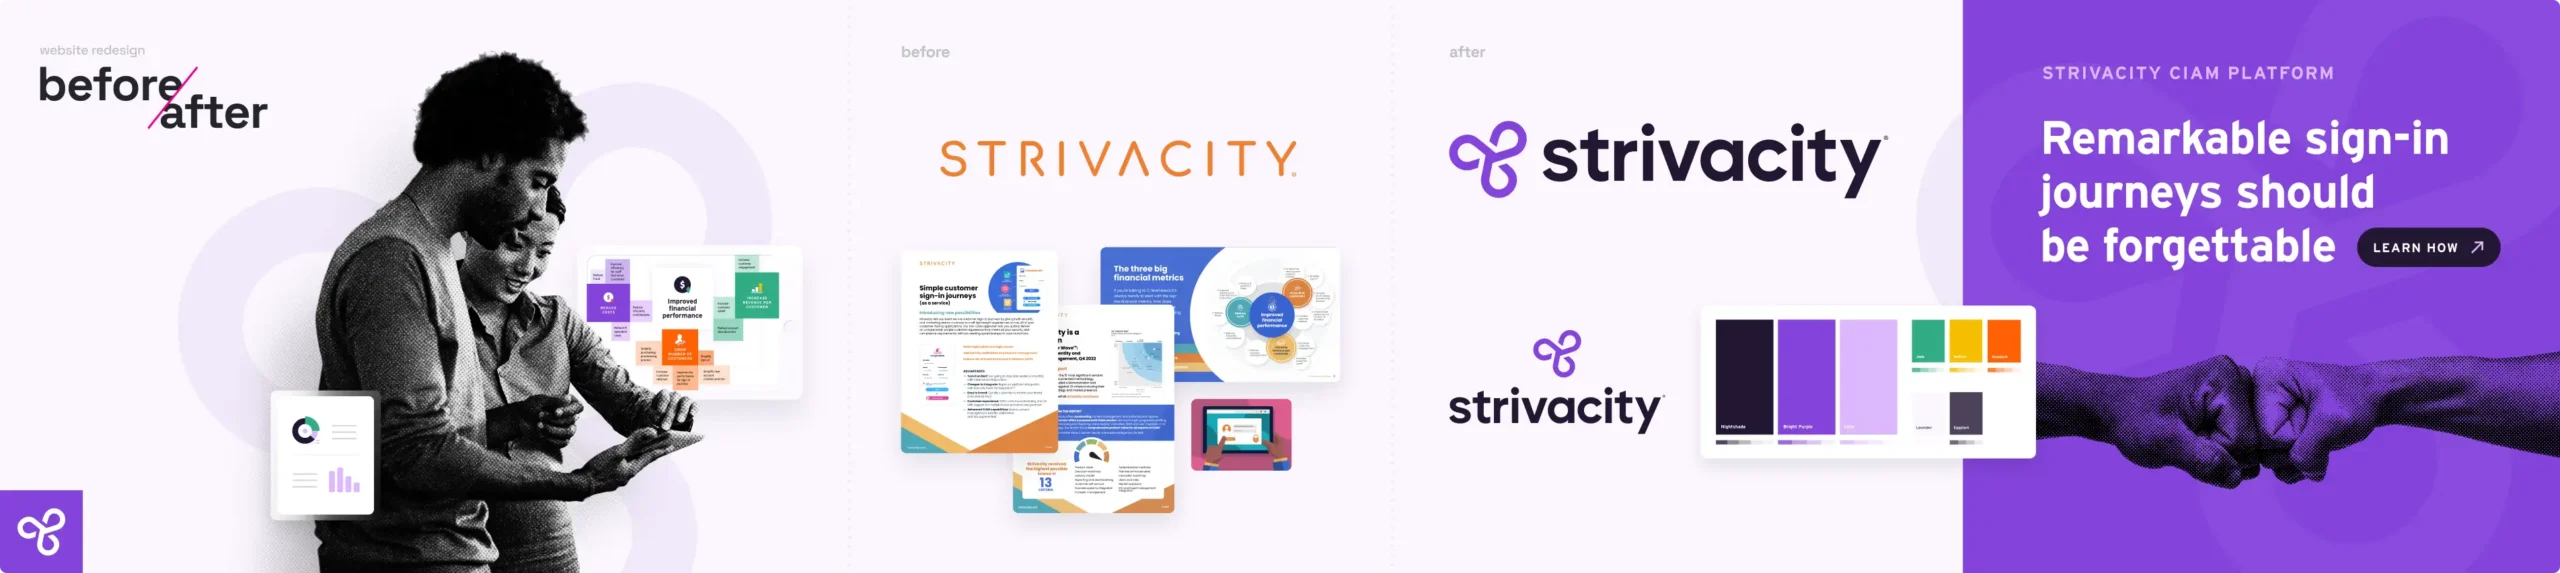 Strivacity Before/After